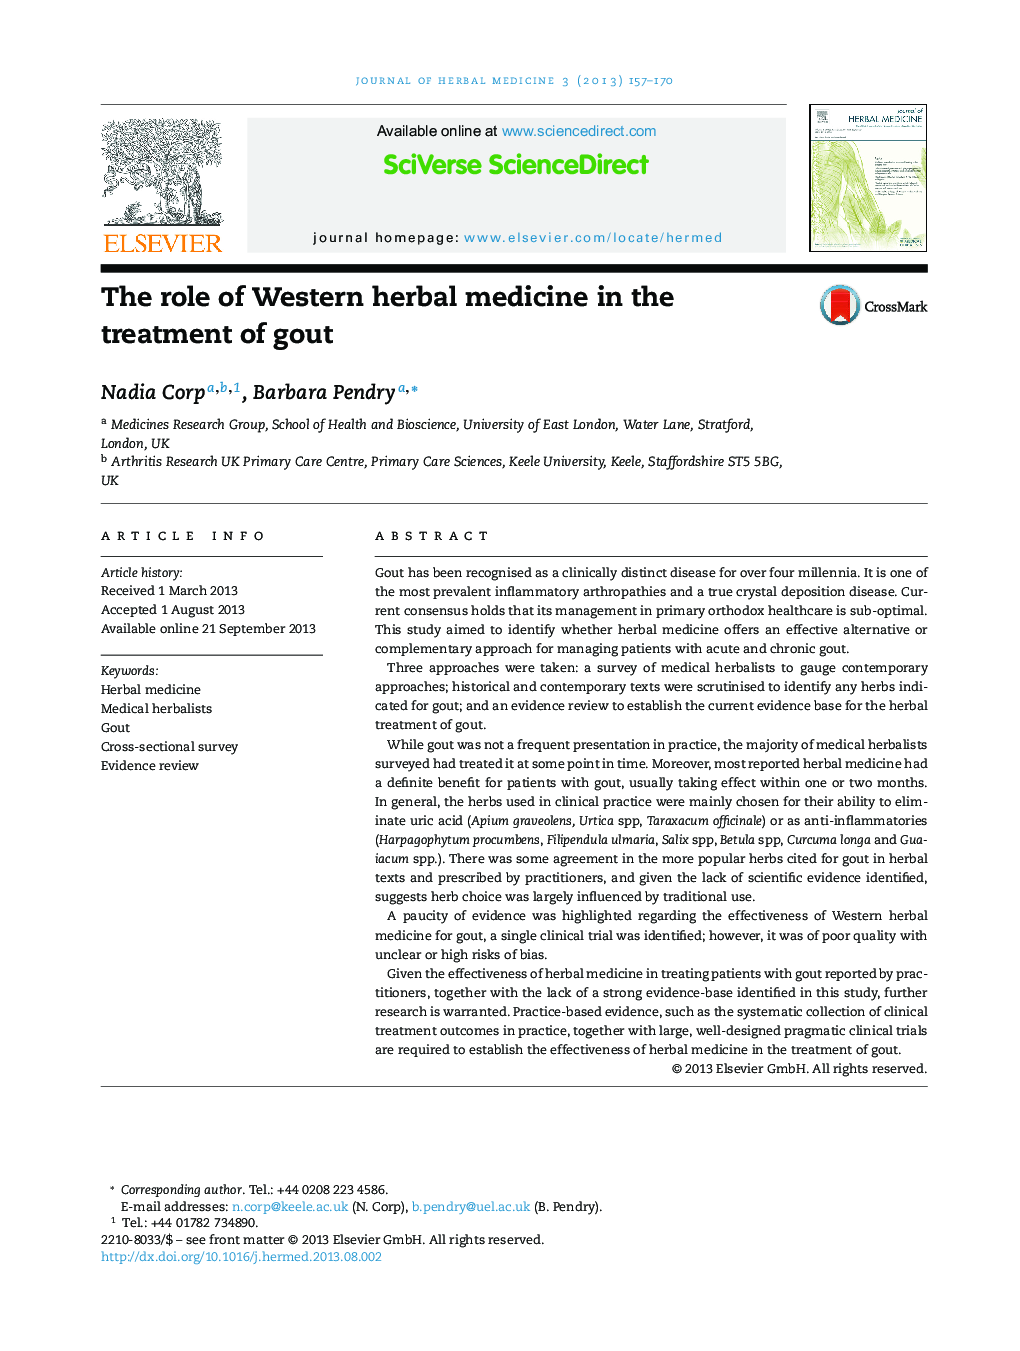 The role of Western herbal medicine in the treatment of gout